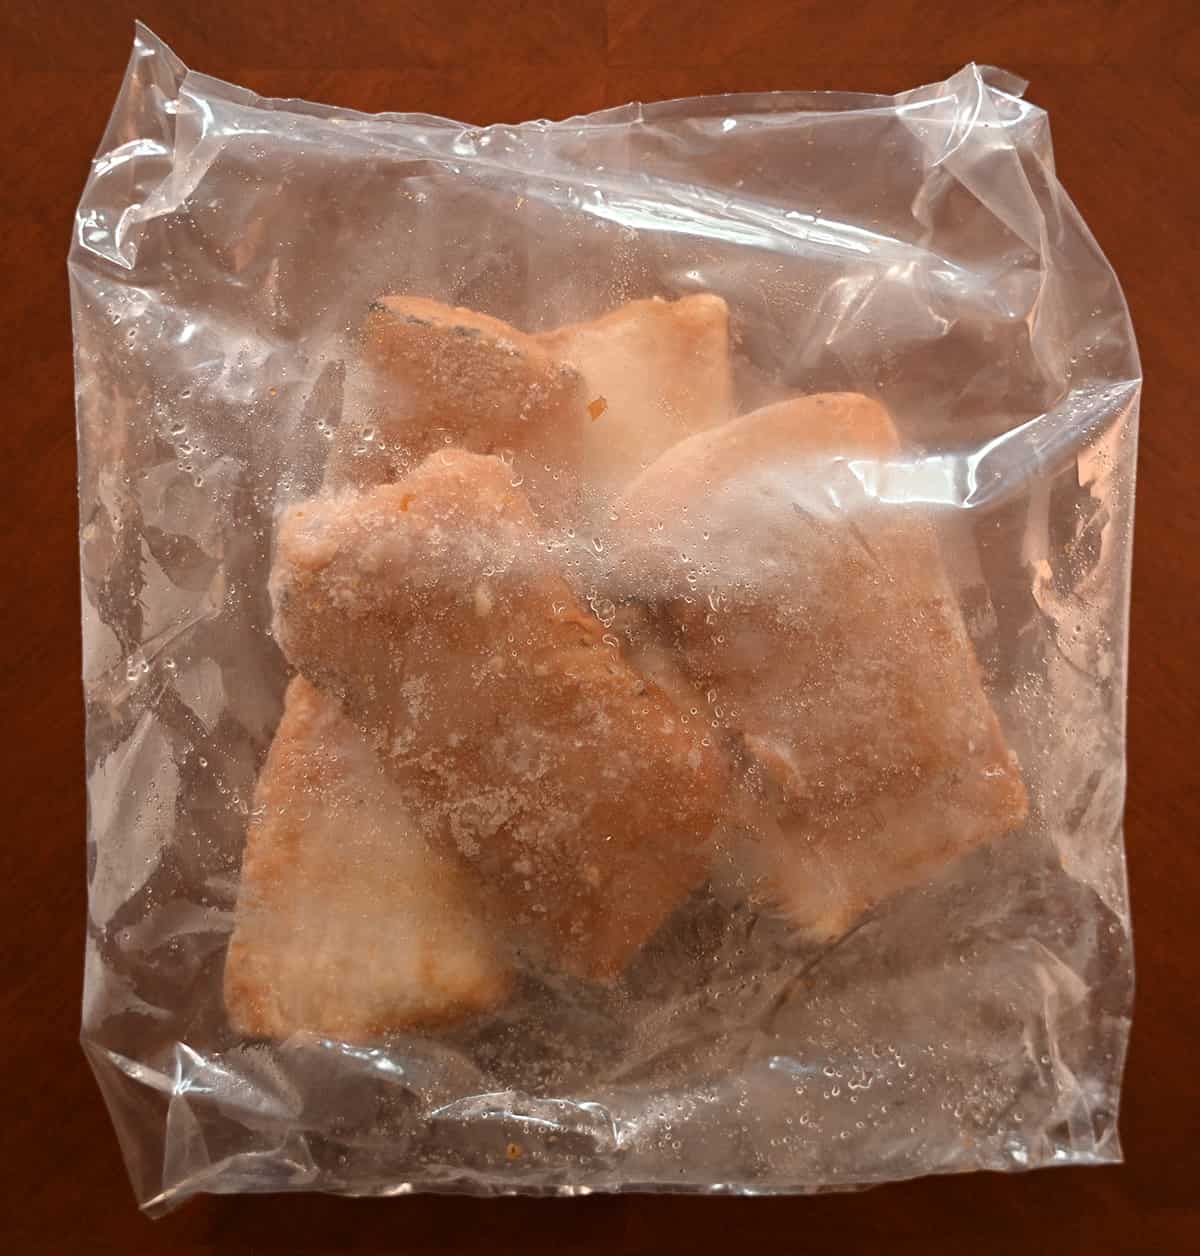 Image showing the bag of cod that comes in the box, in the bag there are four pieces of cod.